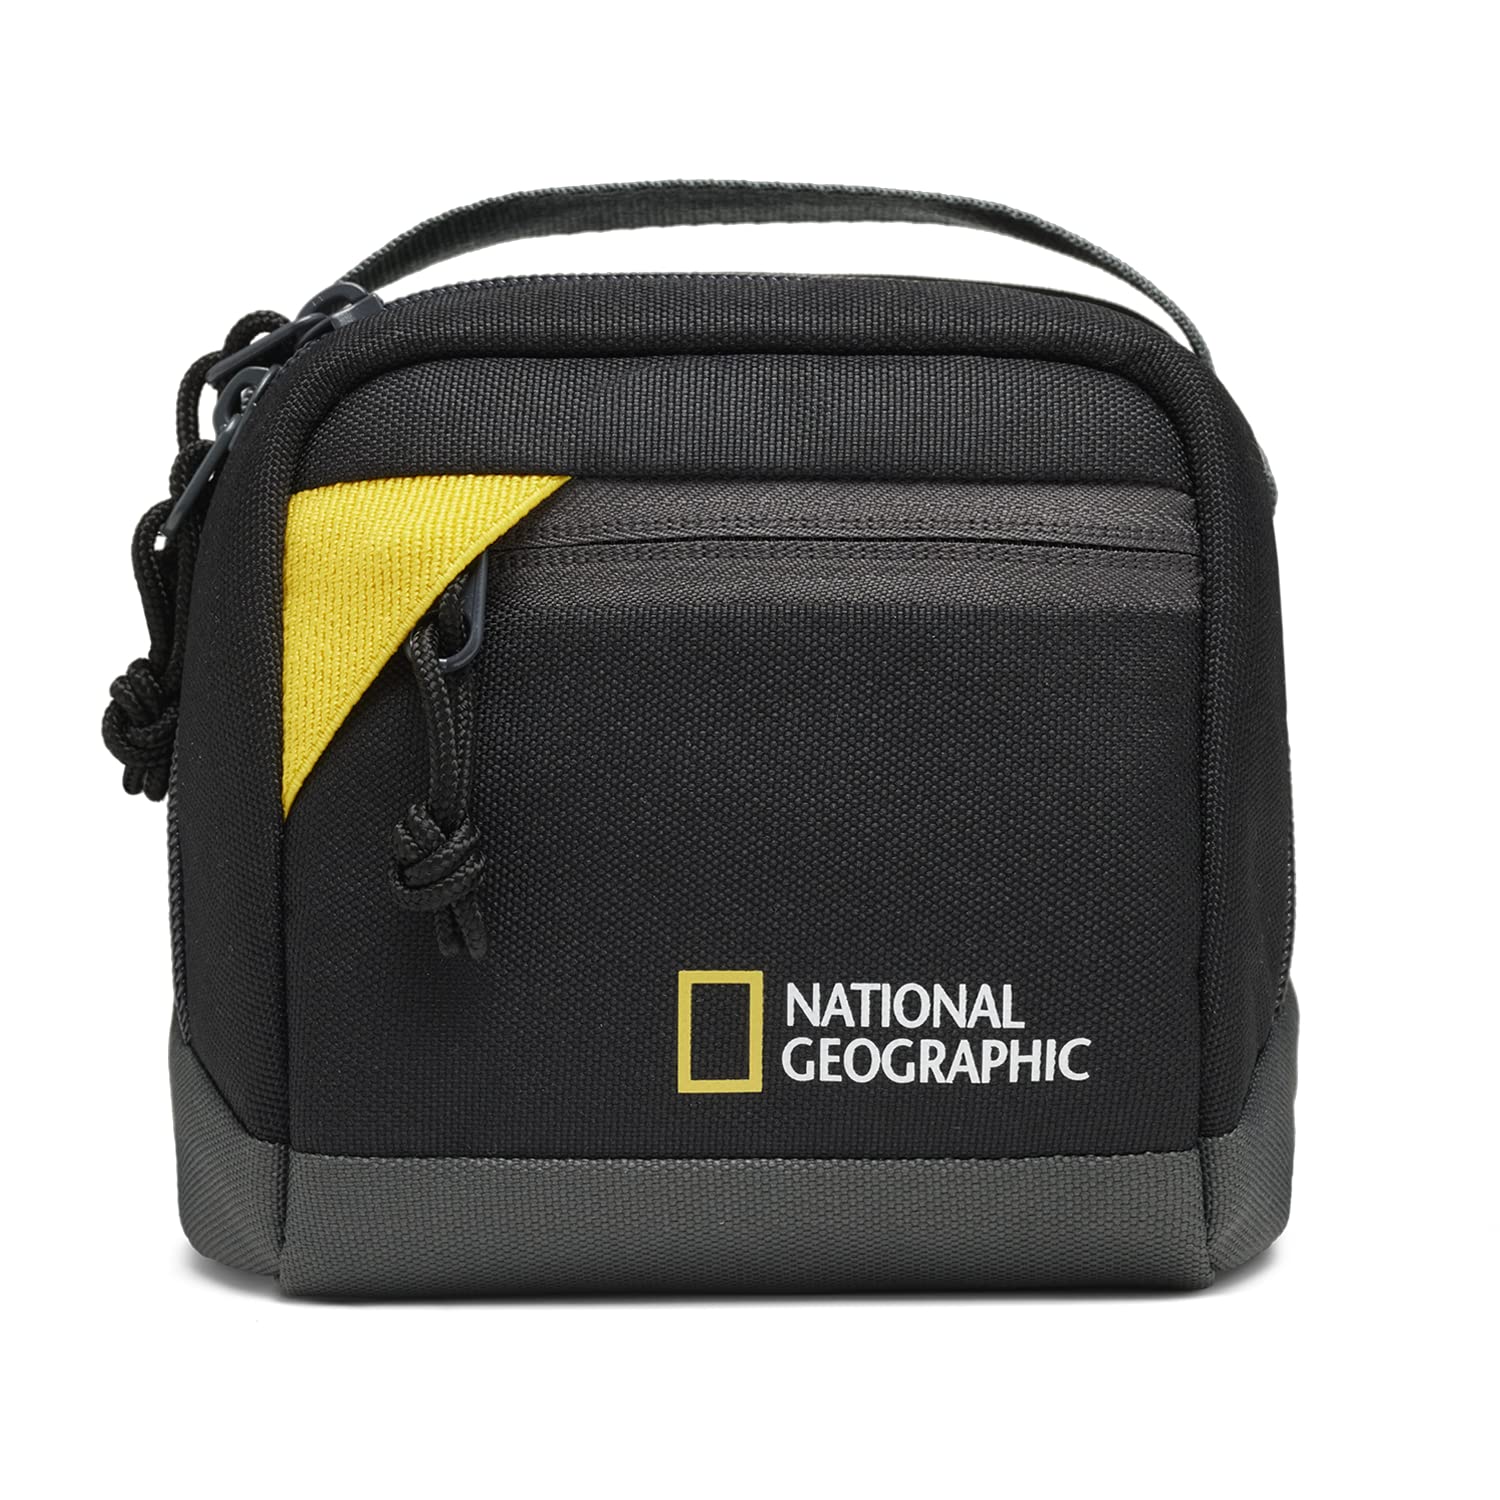 National Geographic Camera Pouch for Compact Cameras, Action Camera, 360 Cameras, or Small Accessories, Integrated Belt Loop, Detachable Strap, Ultra-Lightweight, NG E1 2350, Black [Amazon Exclusive]